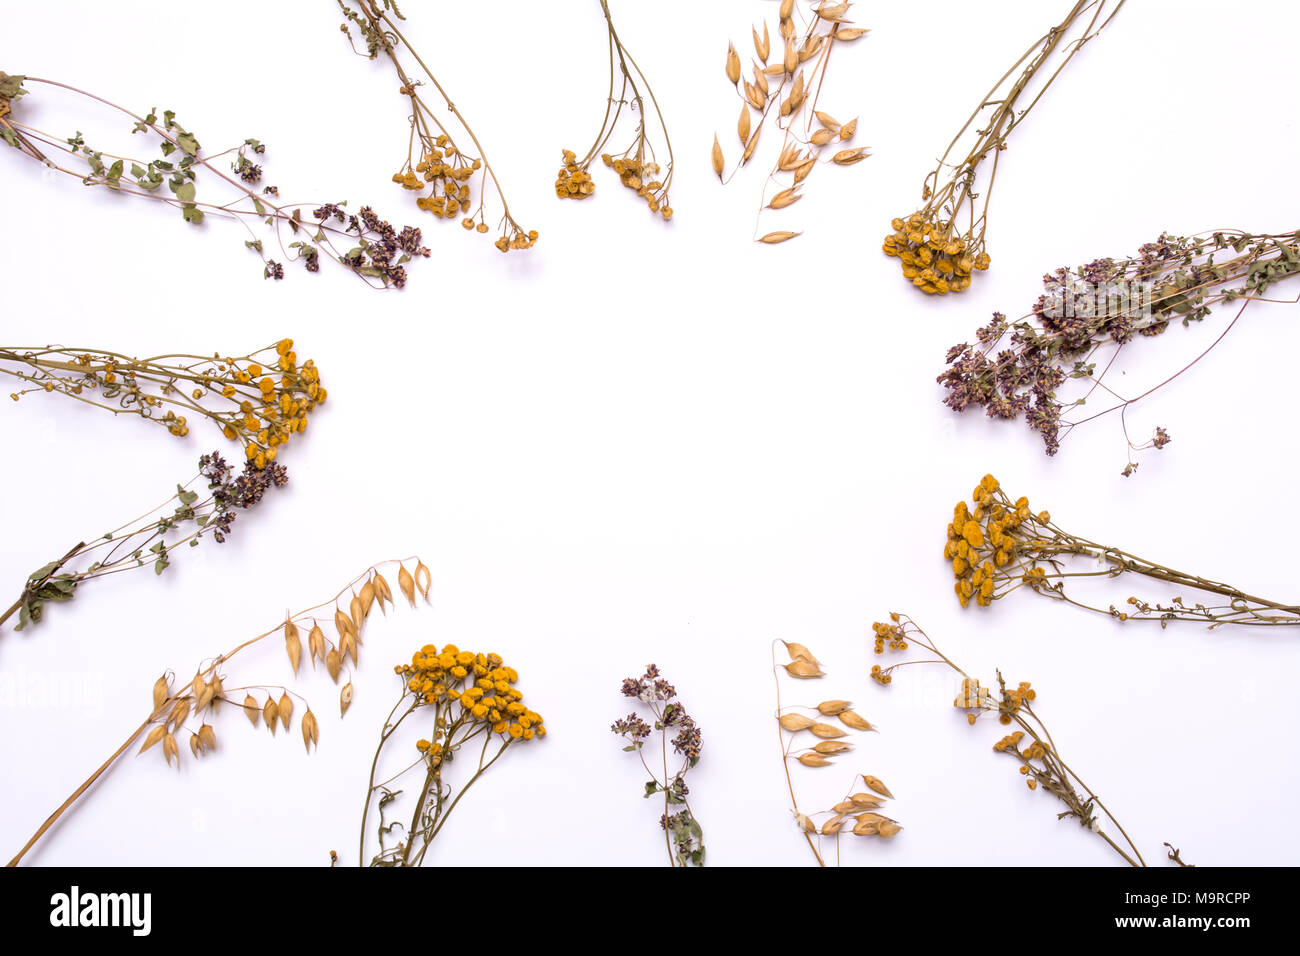 Flat lay frame. Dry branches of tansy and heather on a white background. Calluna vulgaris and Tanacetum view from above. Stock Photo